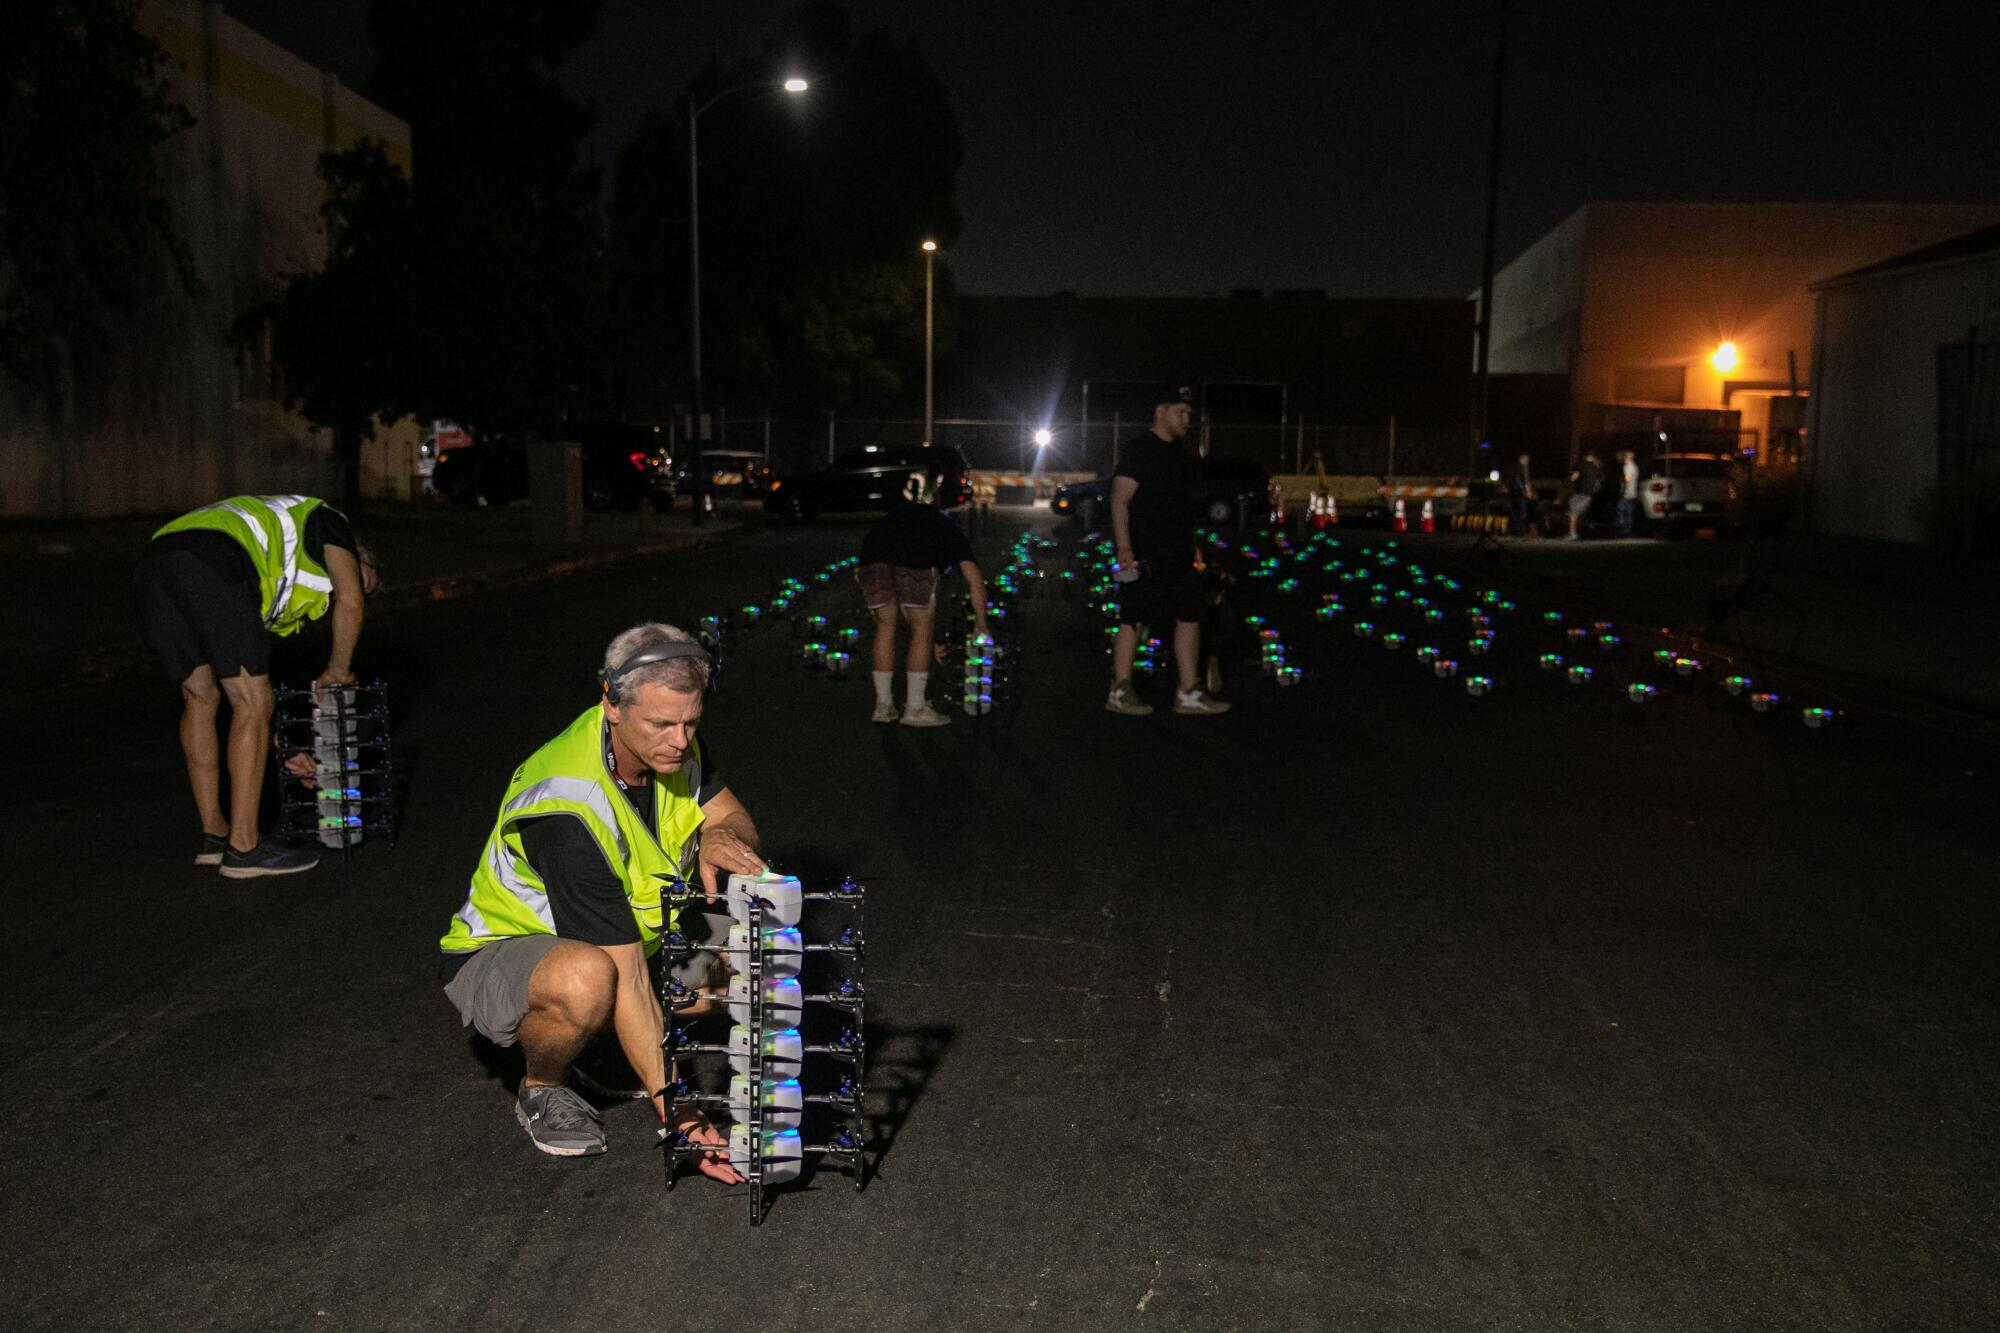 People picking up small drones with lighted drones in rows behind